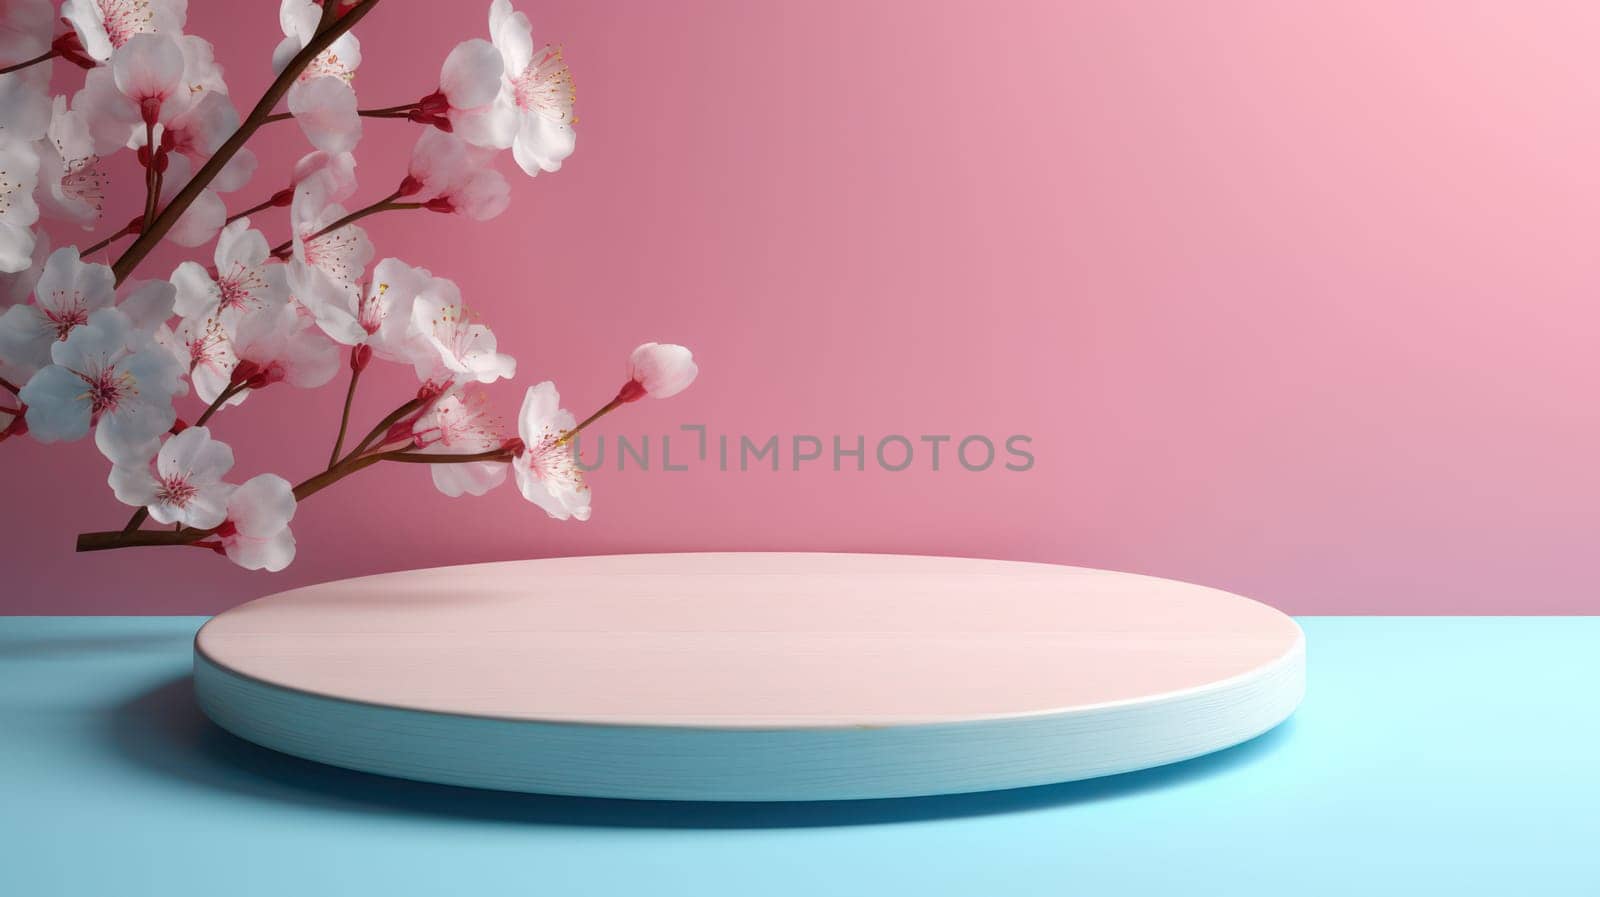 Minimalistic Pastel Pink Abstract Geometric Design on Clean White Background with Empty Pedestal: A Modern Floral Showcase for Fashion Presentation